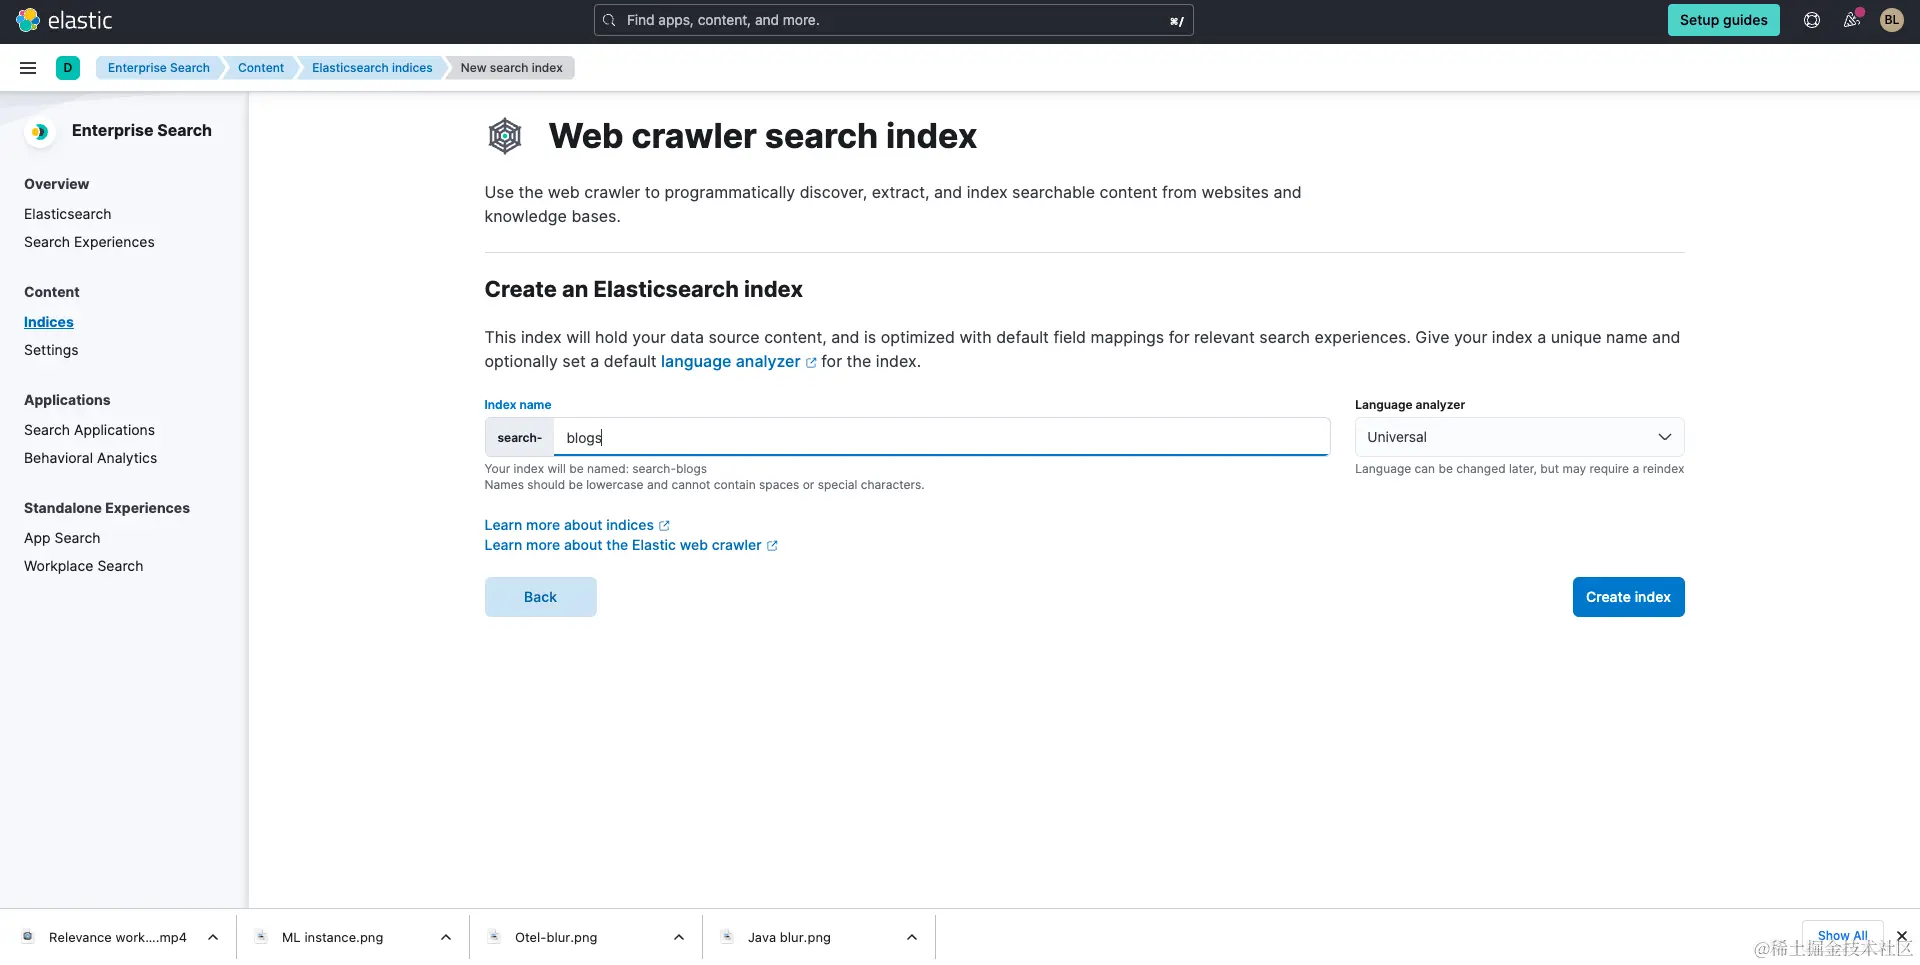 add-search-web-crawler-search-index.png